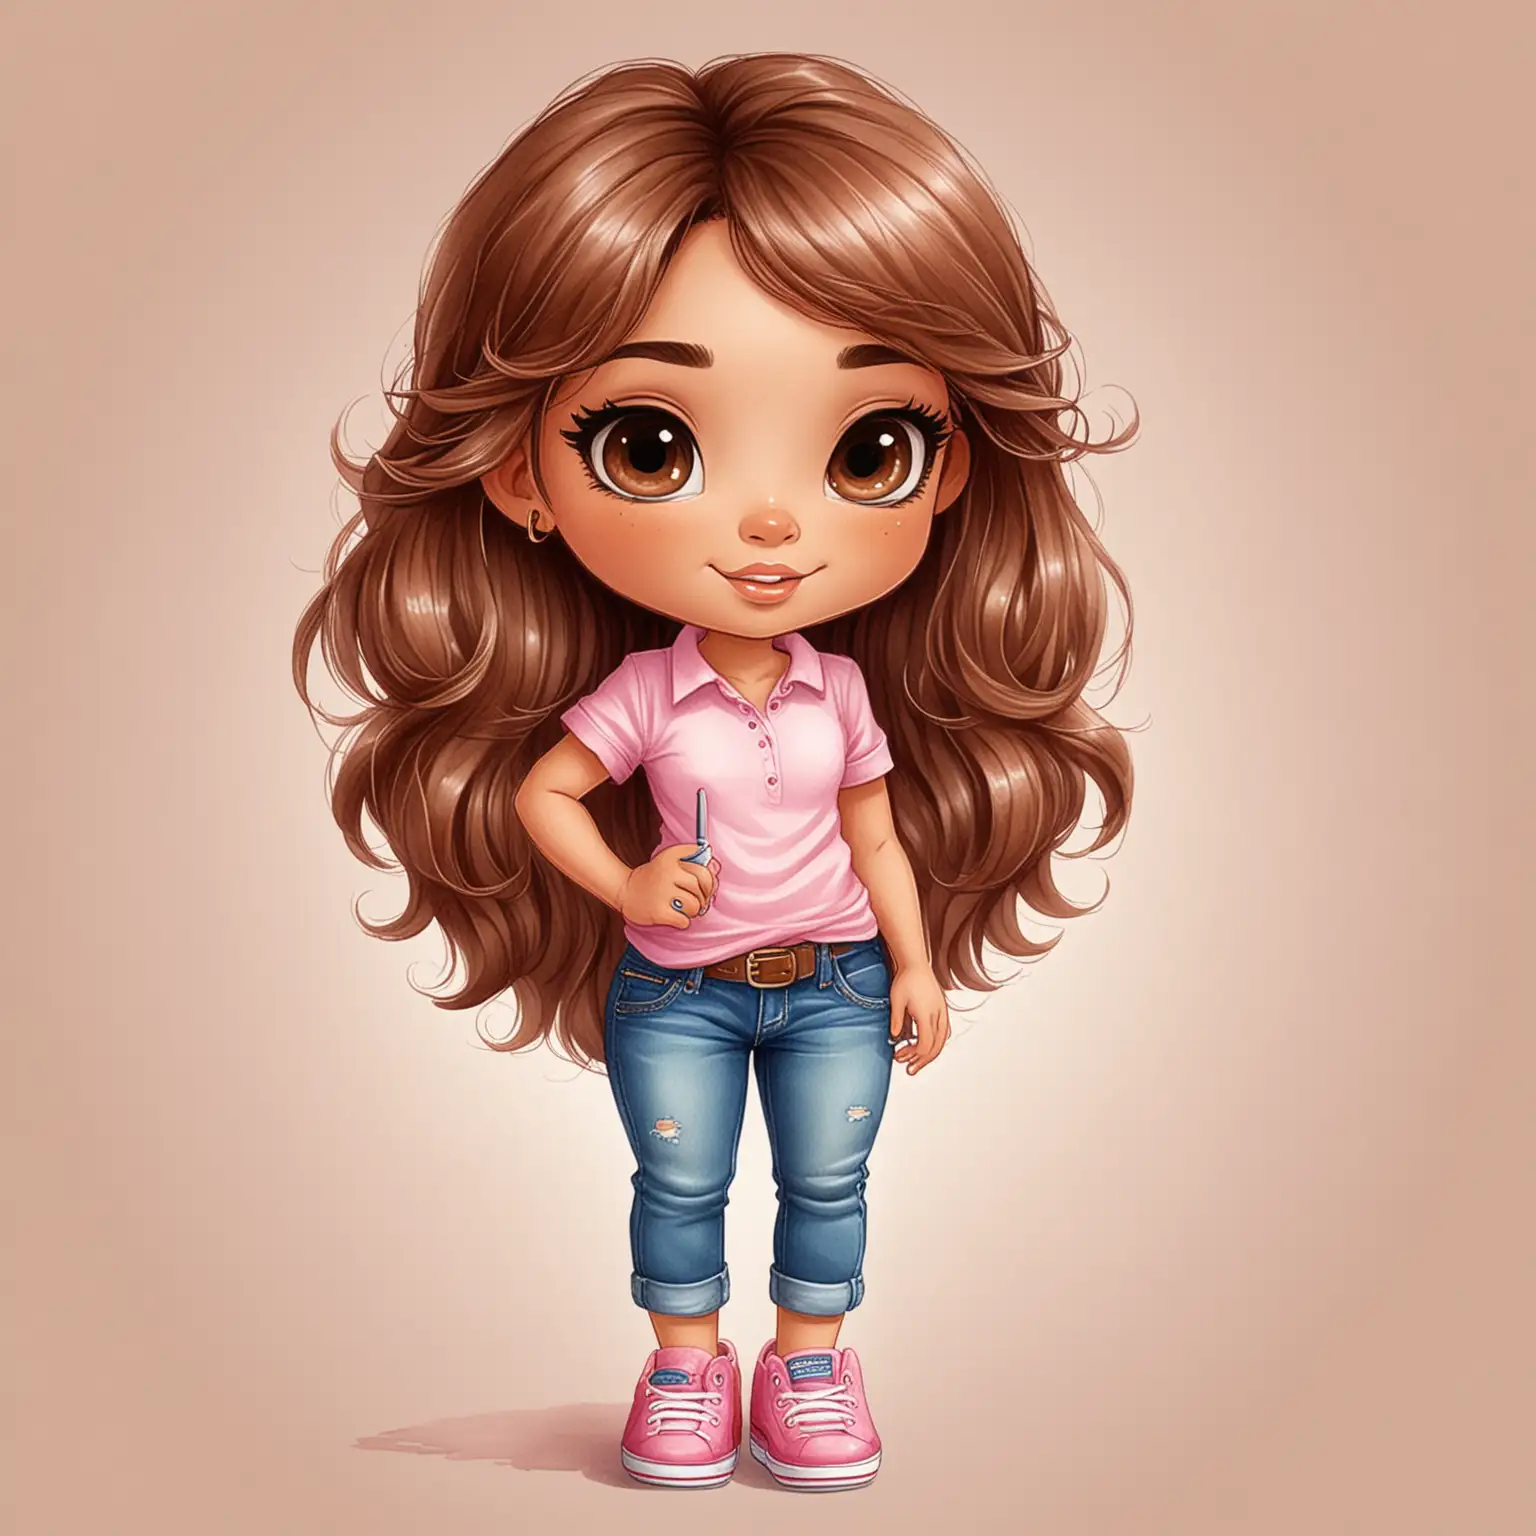 Create a watercolor illustration of a chibi cartoon tan skin latina girl. She is wearing a pink shirt, blue jeans and pink shoes holding a pen and a cup in her hand. Brown eyes. Extremely highly detailed dark brown long wavy hair. White background